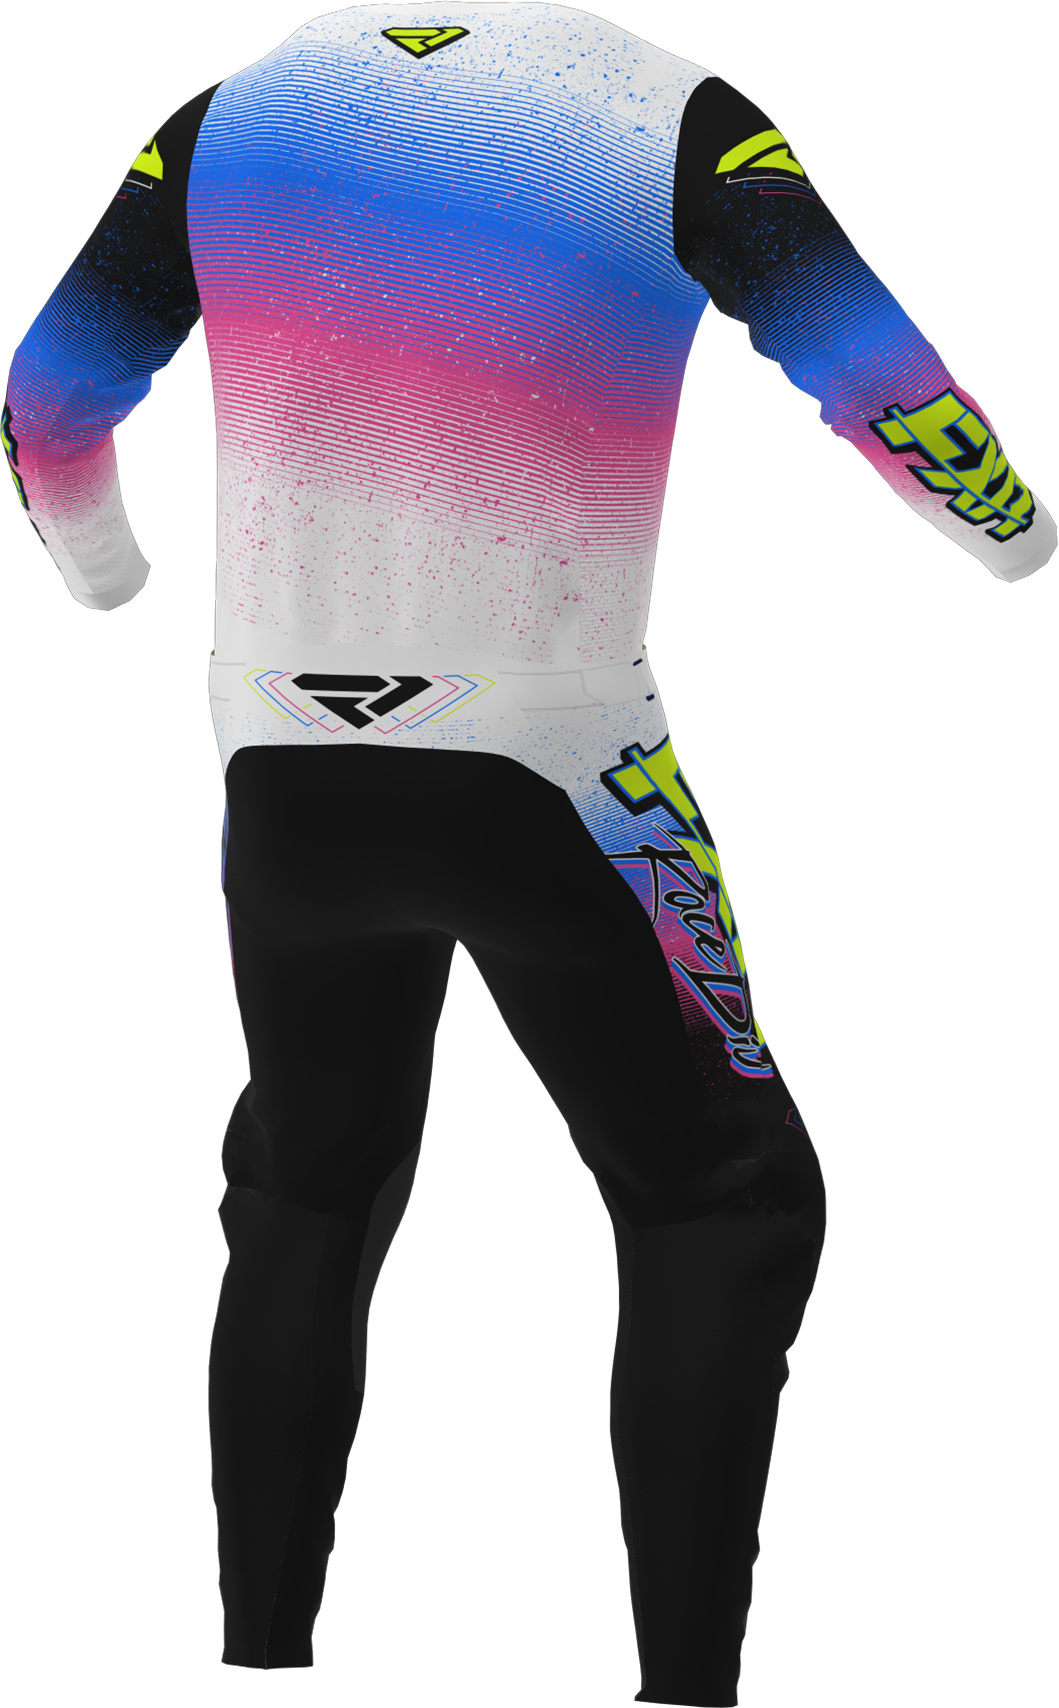 A 3D image of FXR's Podium MX Jersey and Pant in Retro colorway